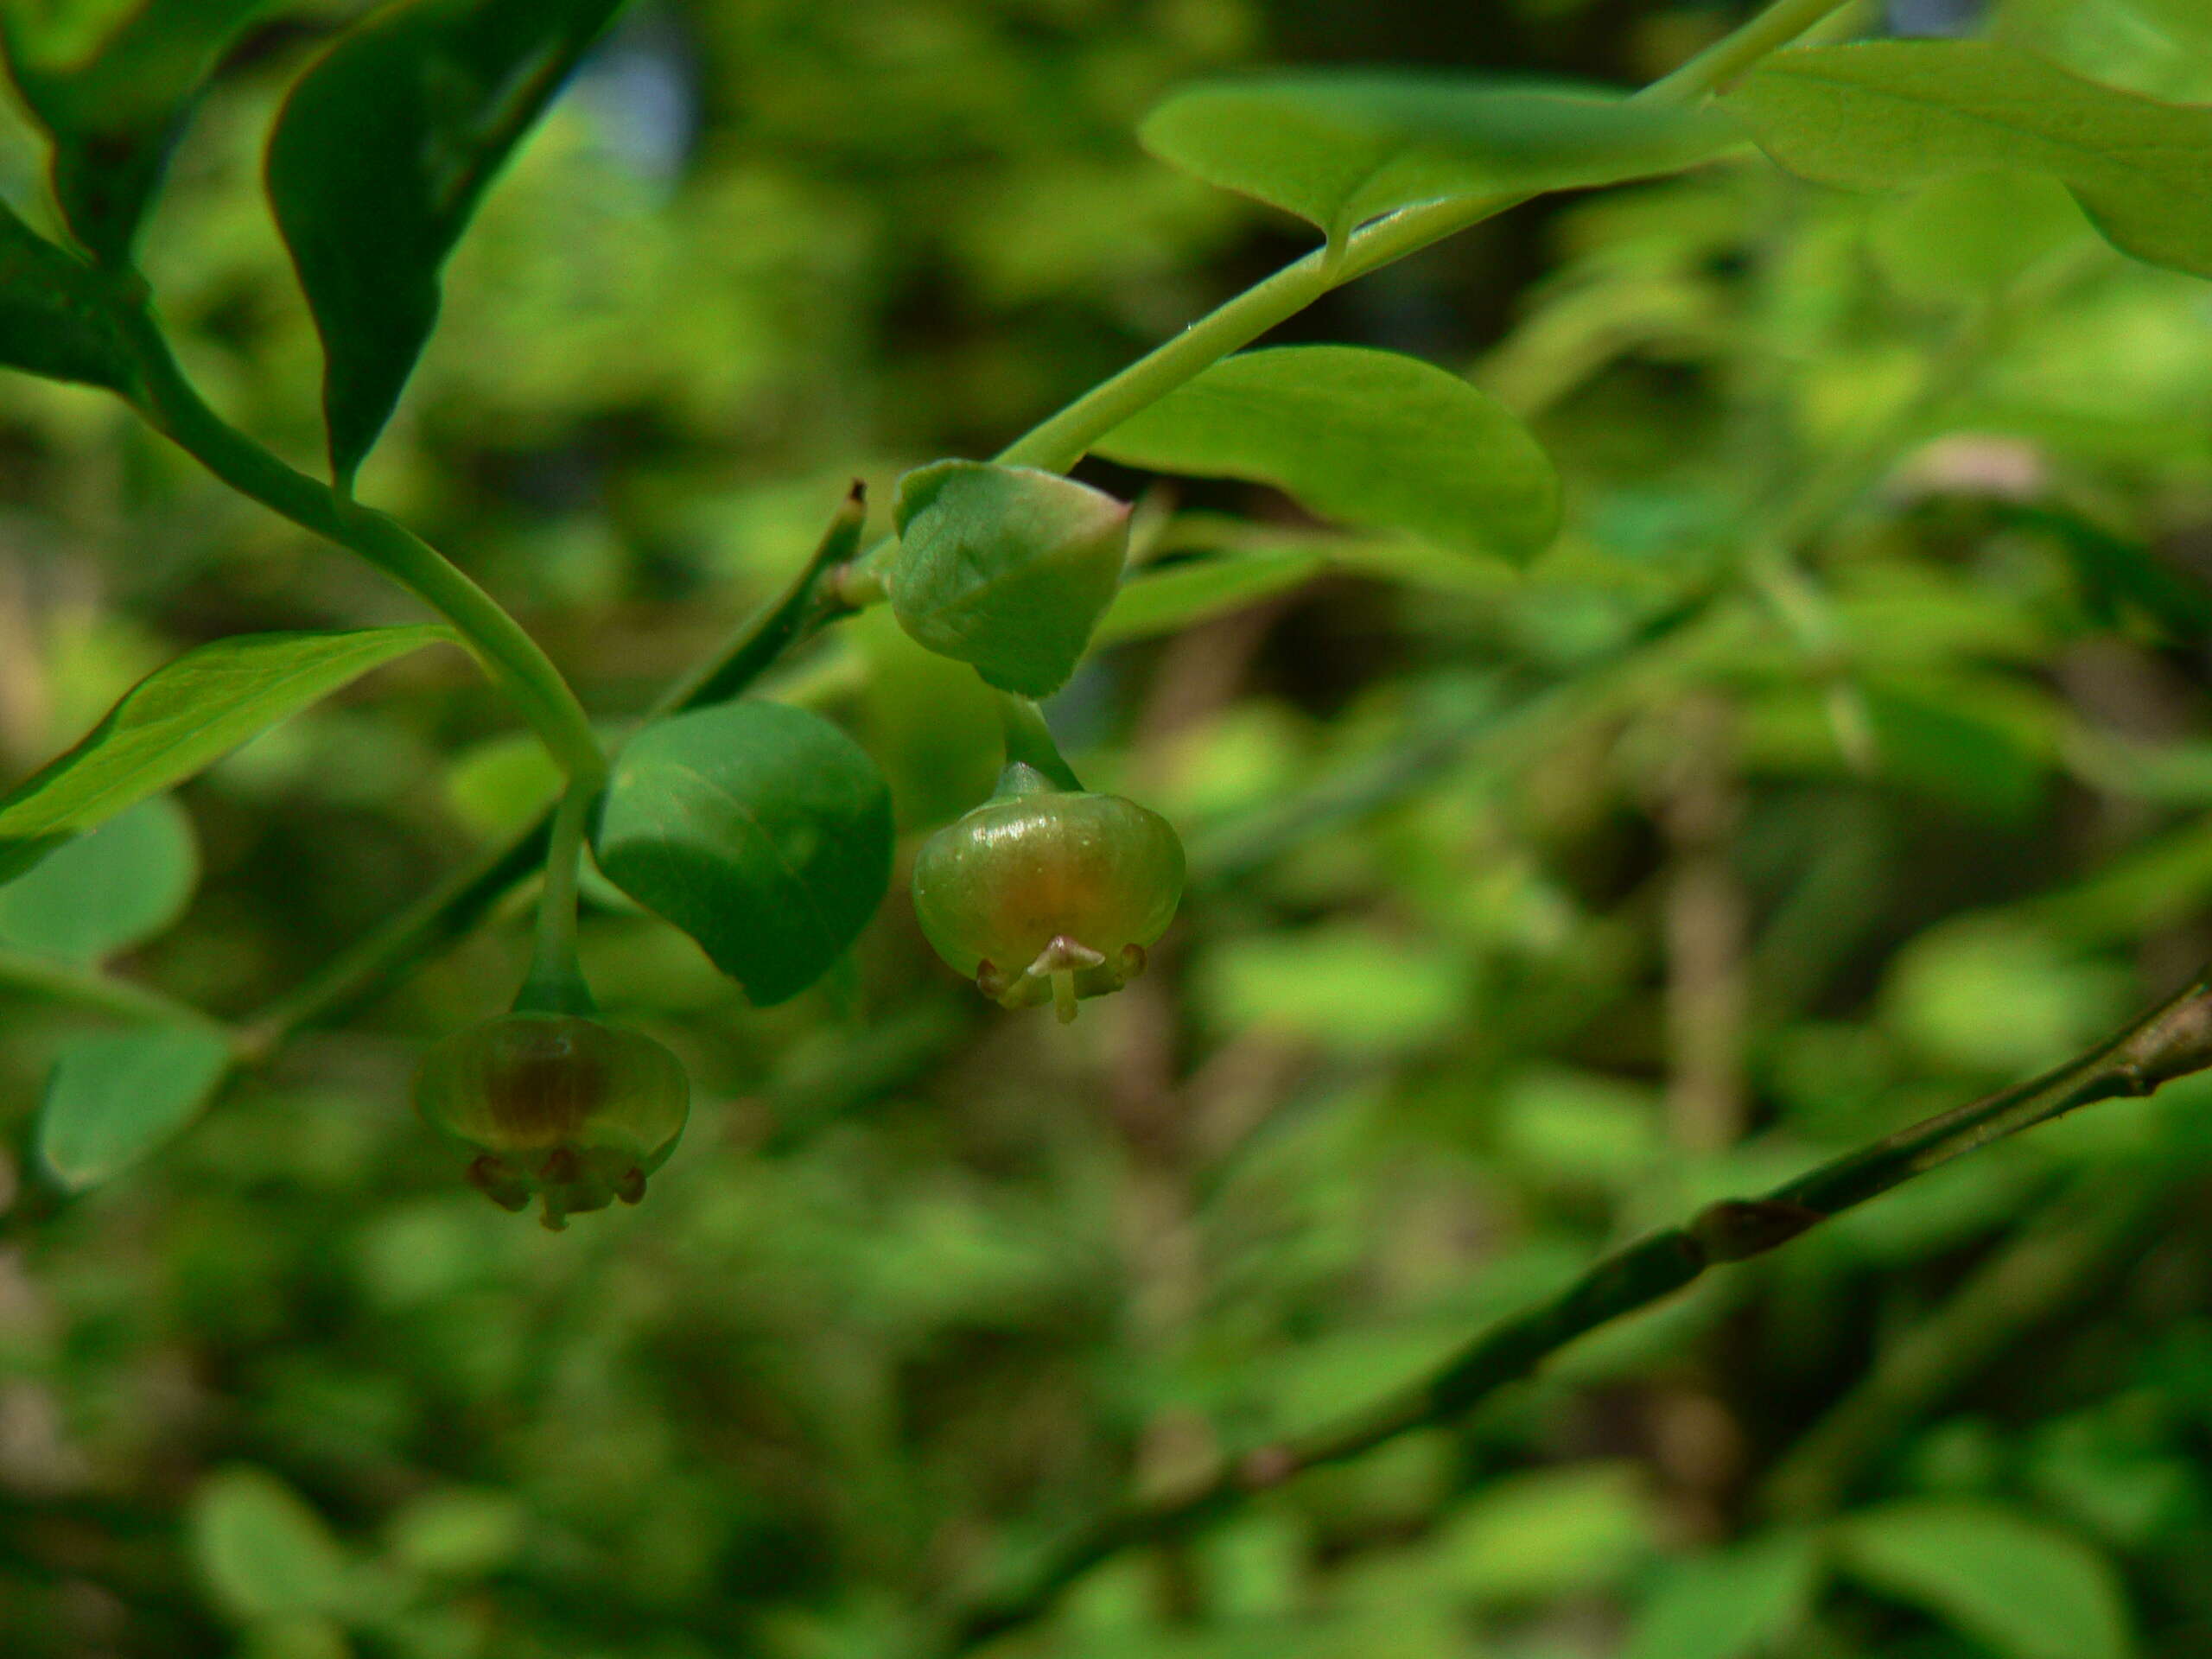 Image of Red Huckleberry